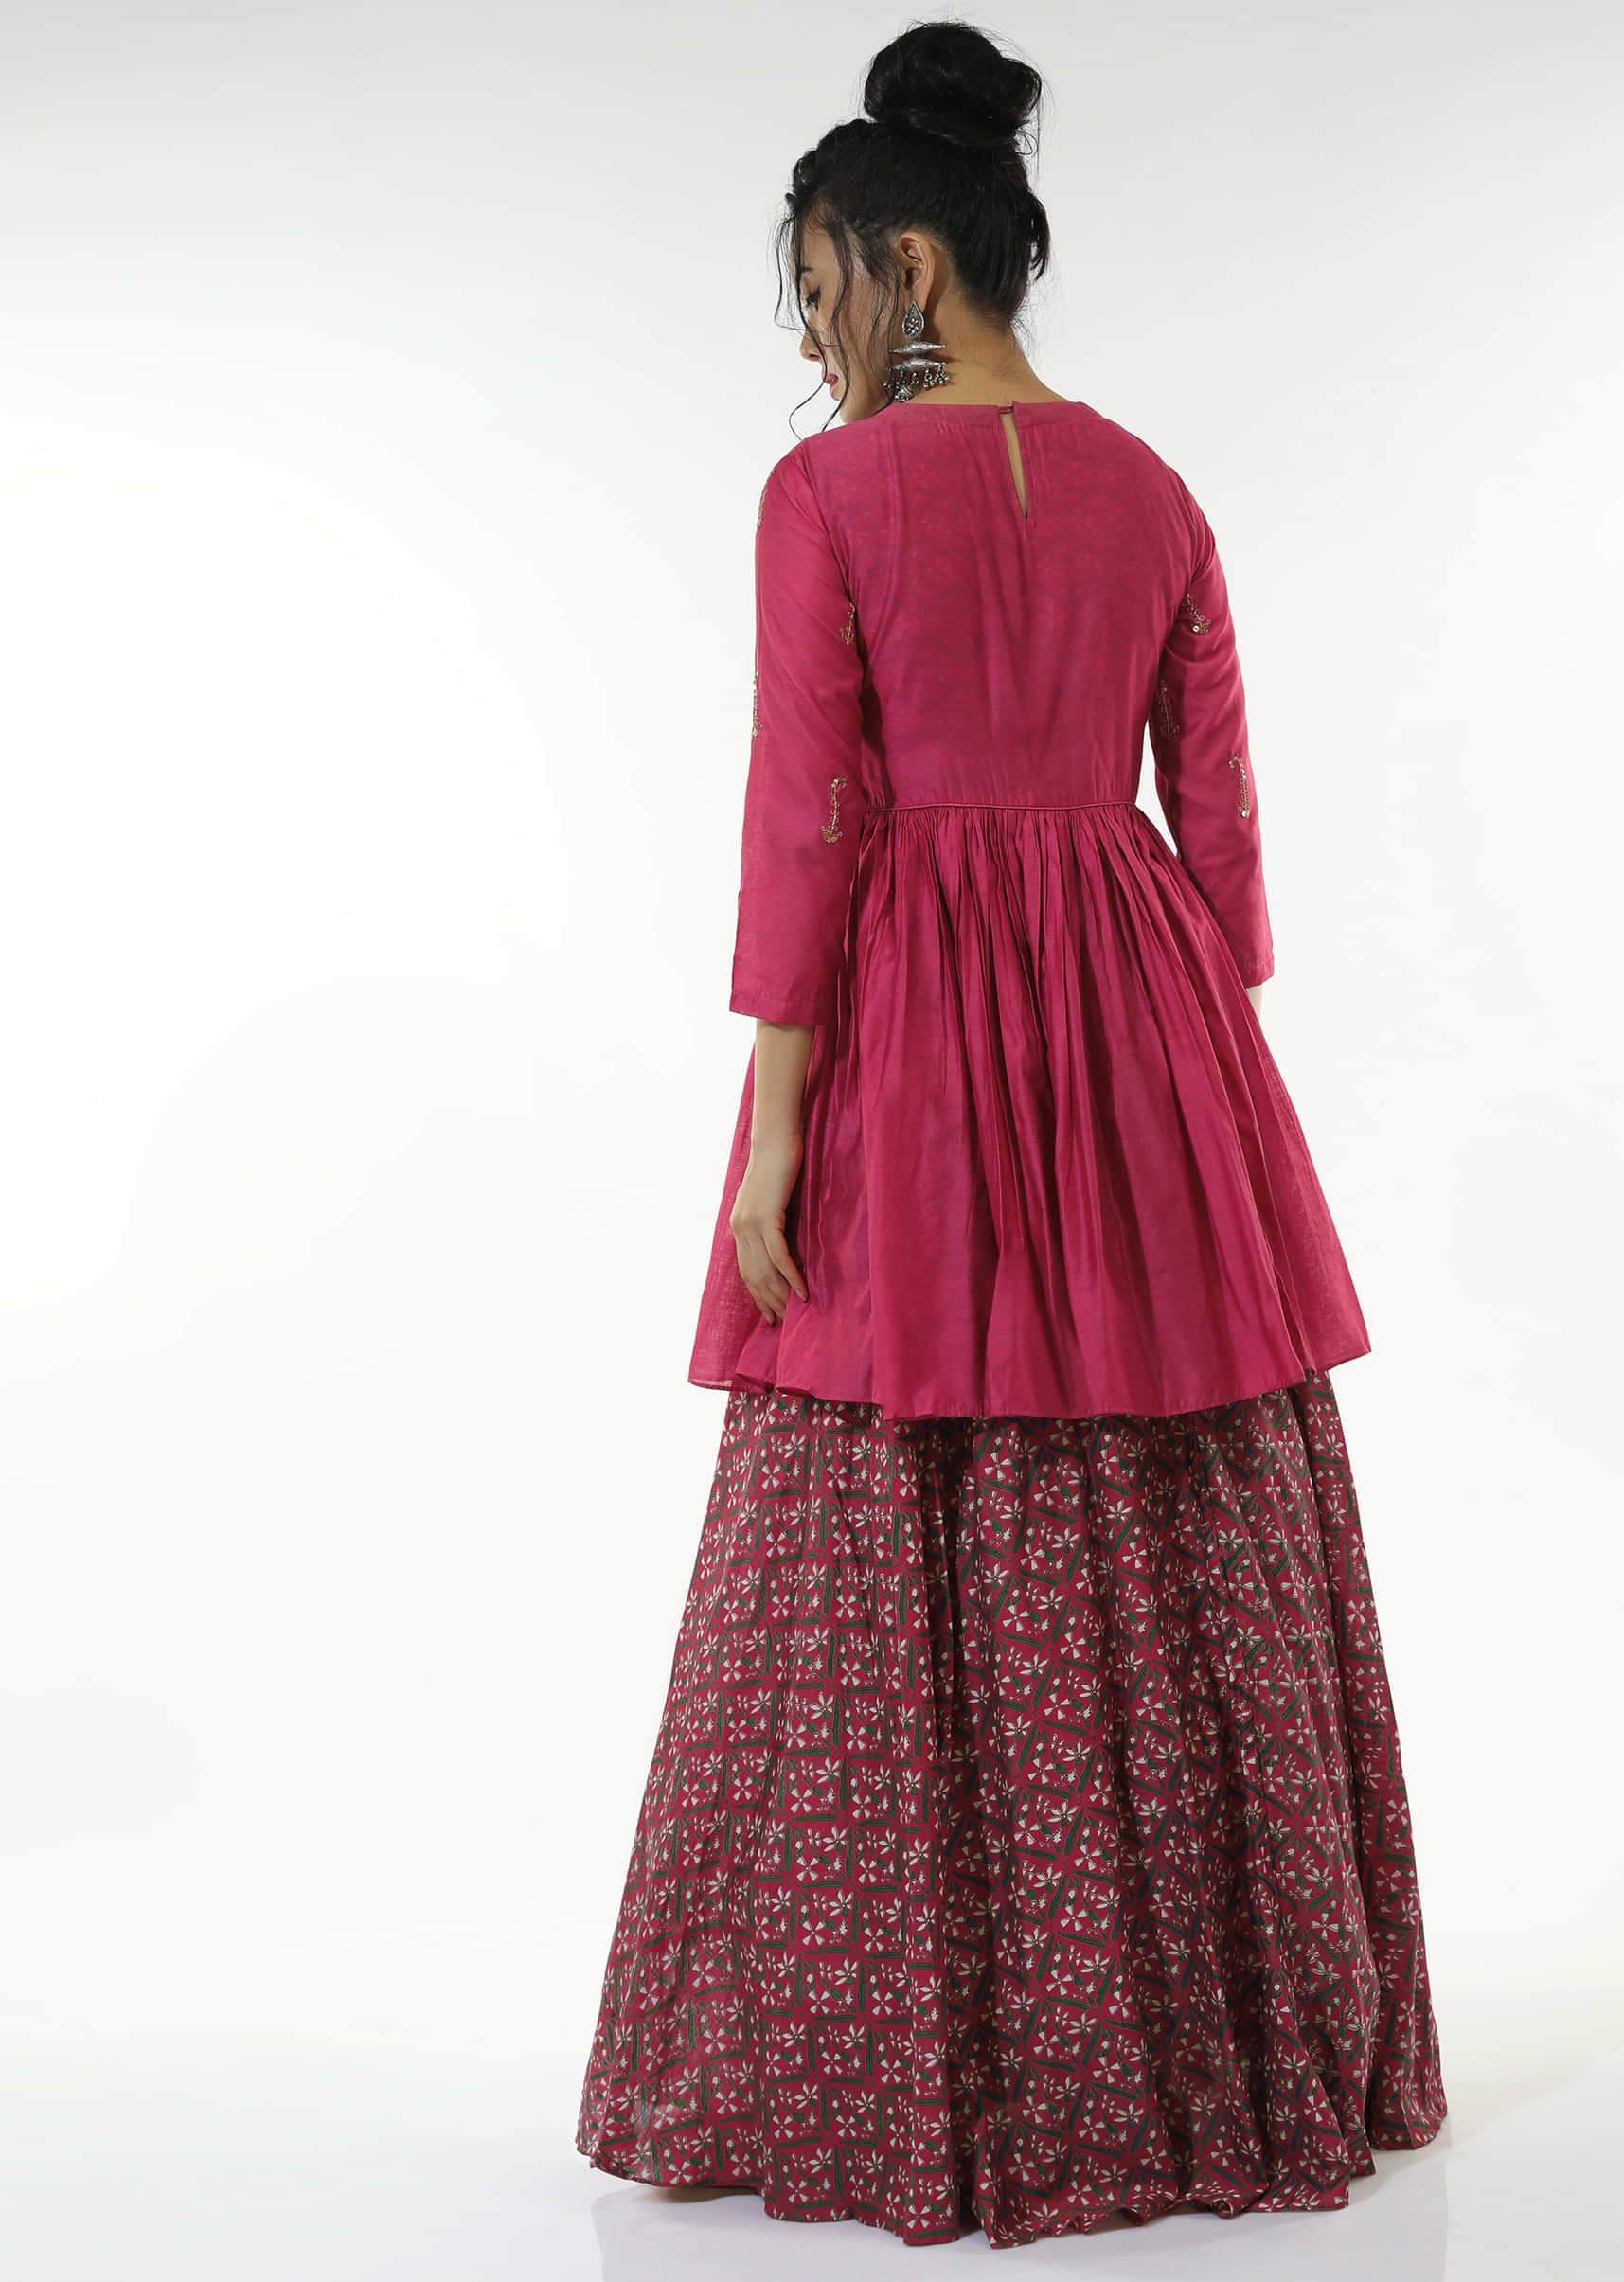 Berry Pink Long Dress With Floral Jaal Print And An Attached Peplum Jacket With Front Tie Up And Zari Work  